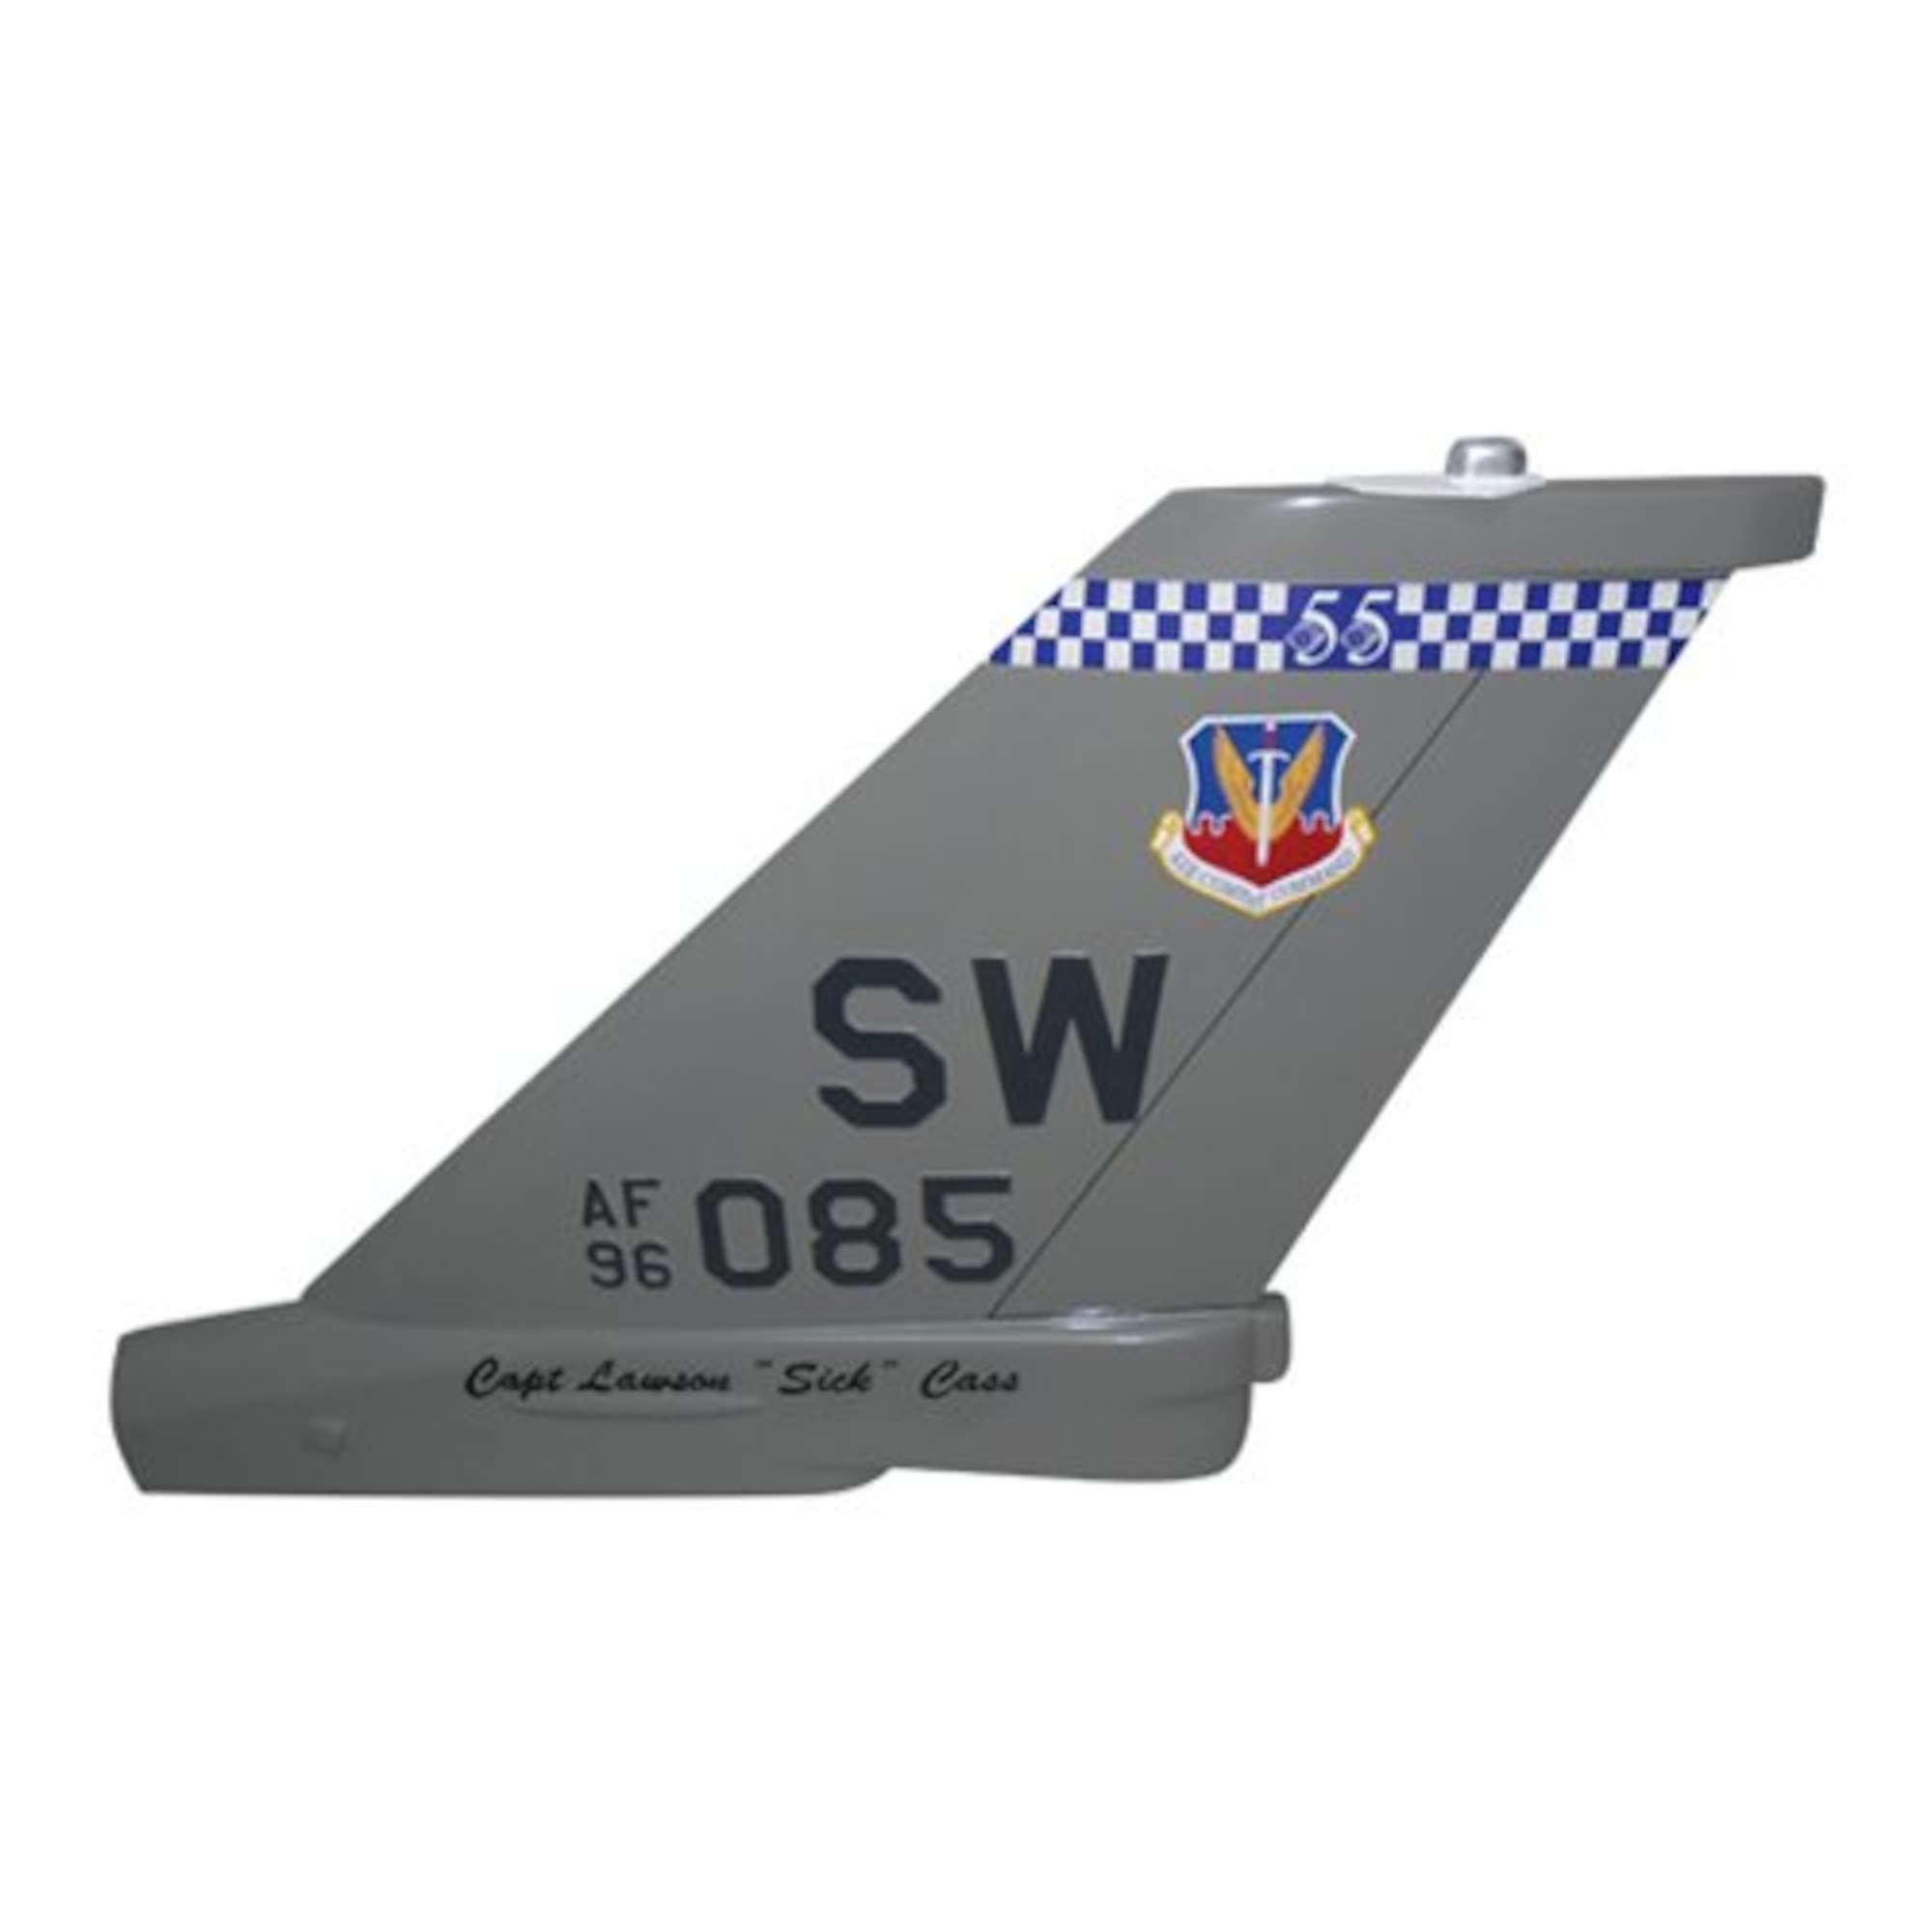 Tail flash of an aircraft assigned to the 55th Fighter Squadron